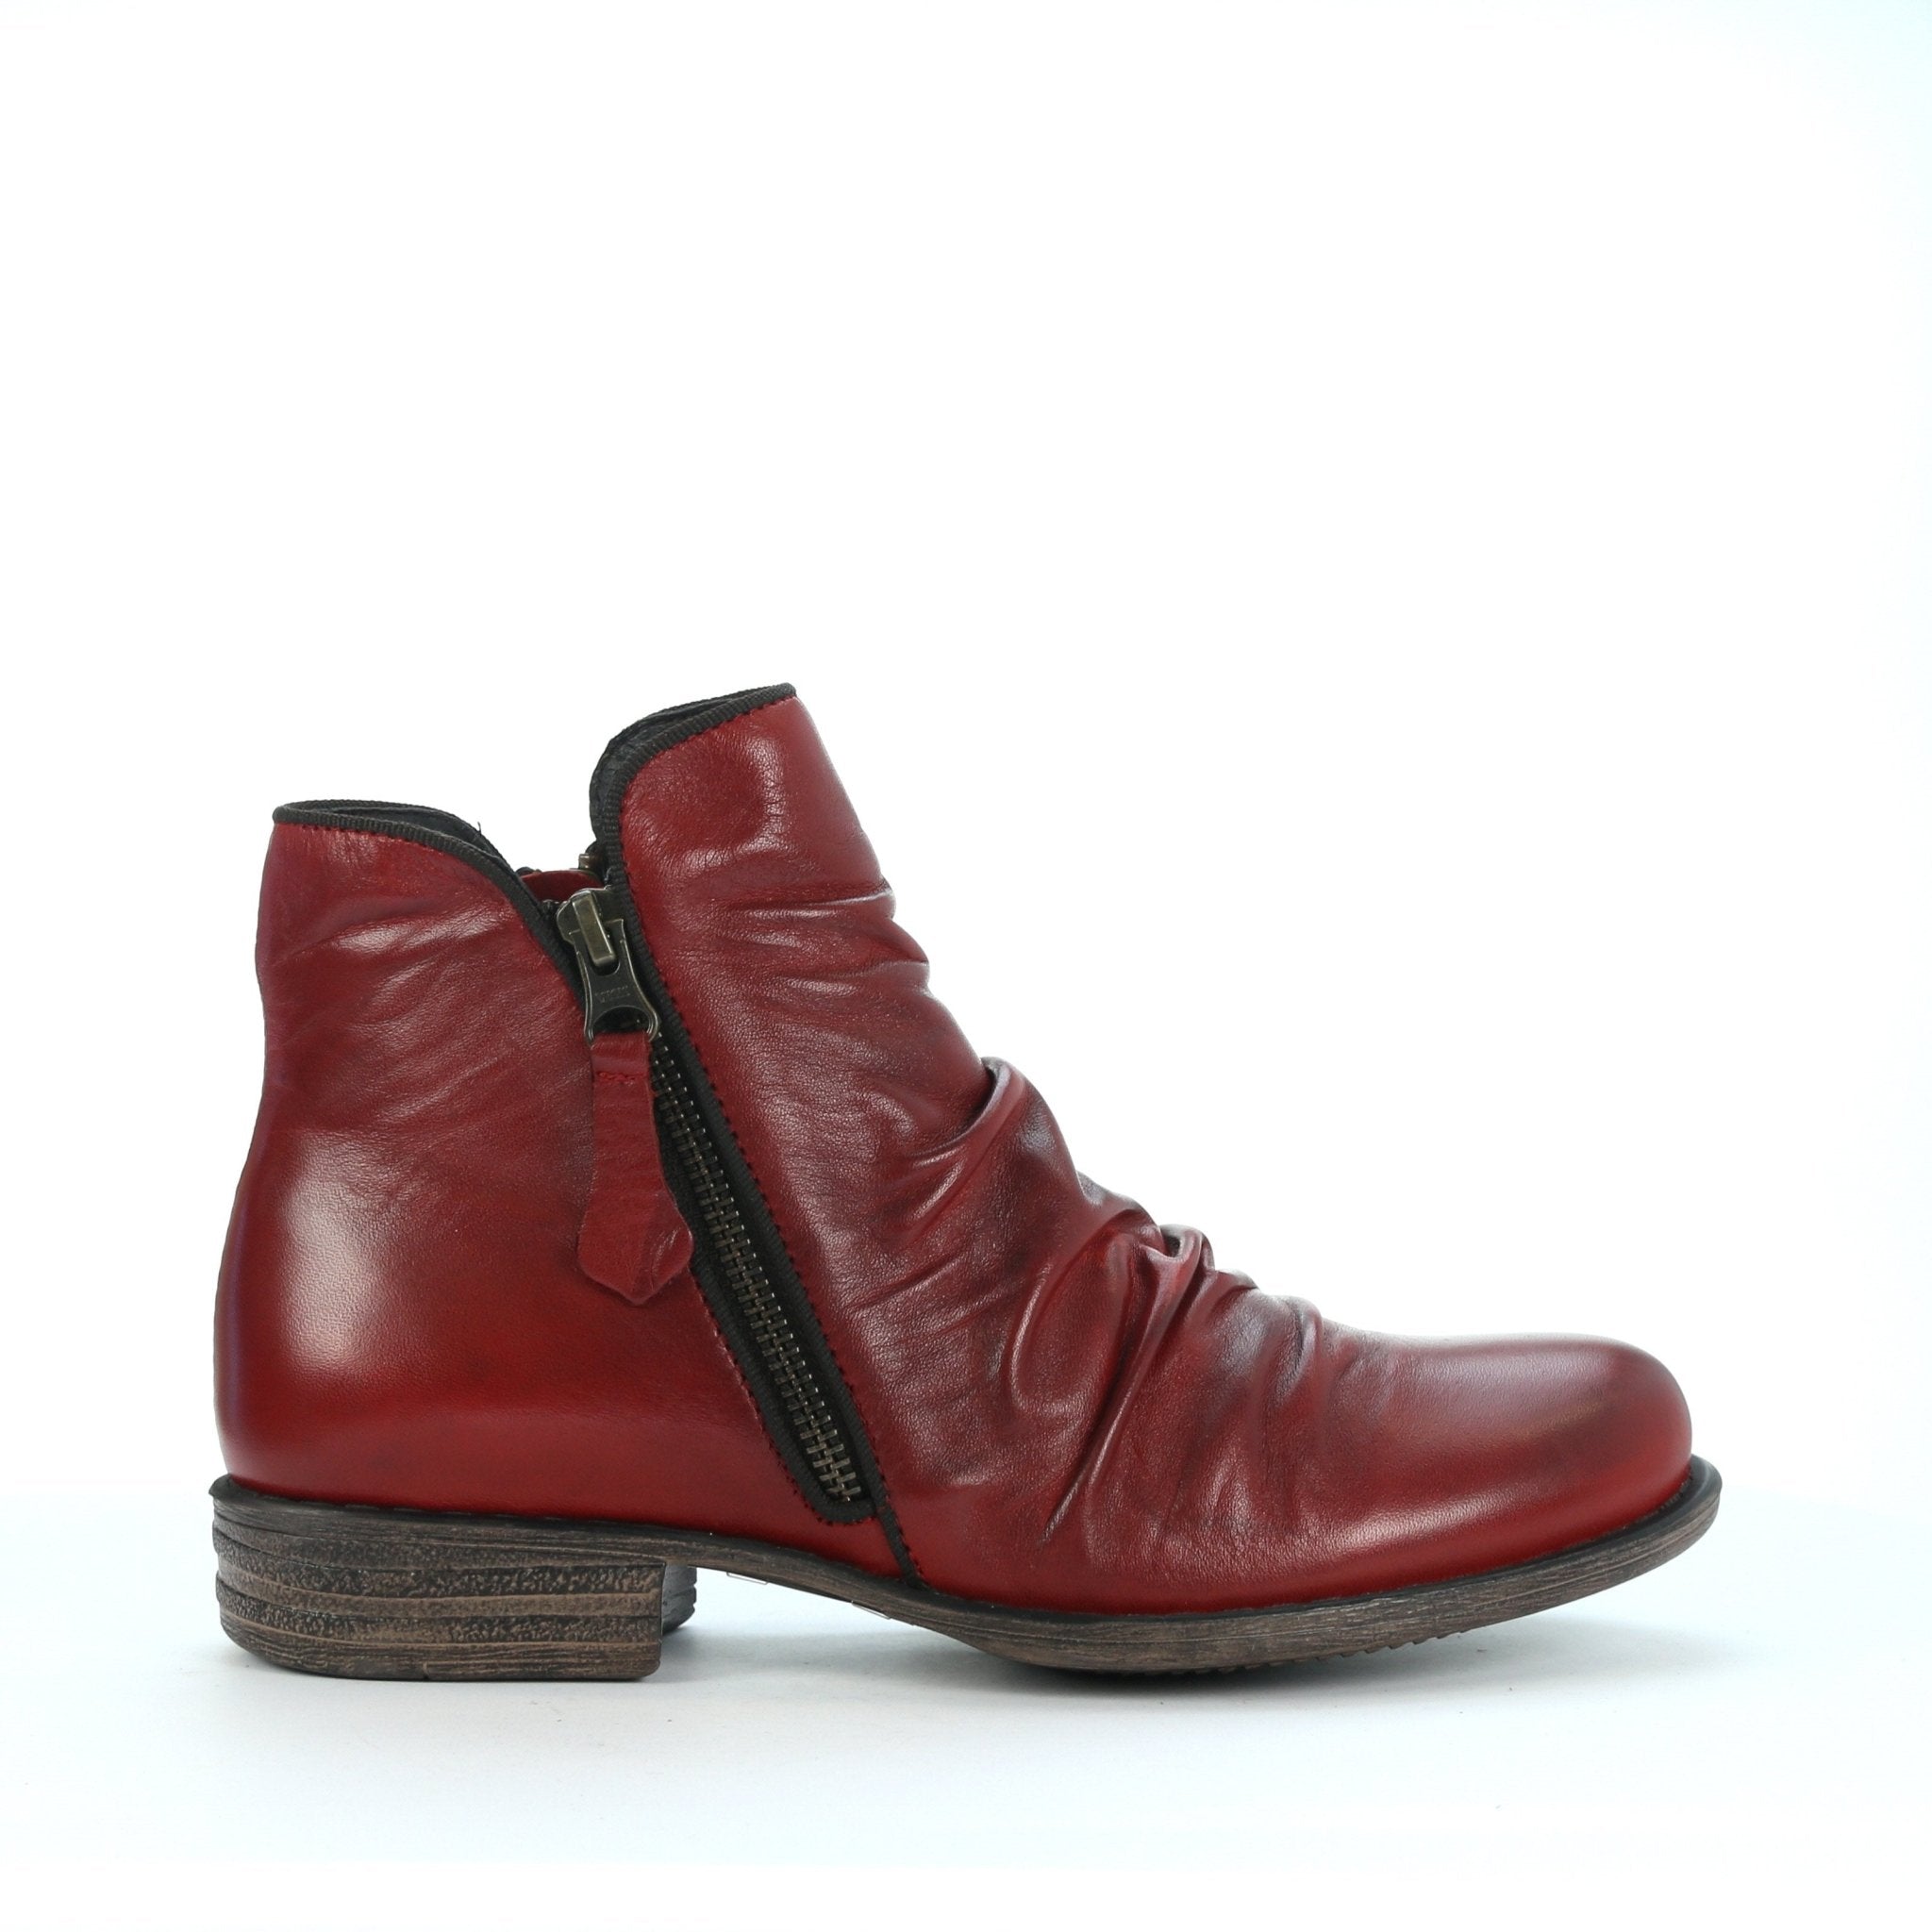 WILLET - EOS Footwear - Ankle Boots #color_Brandy